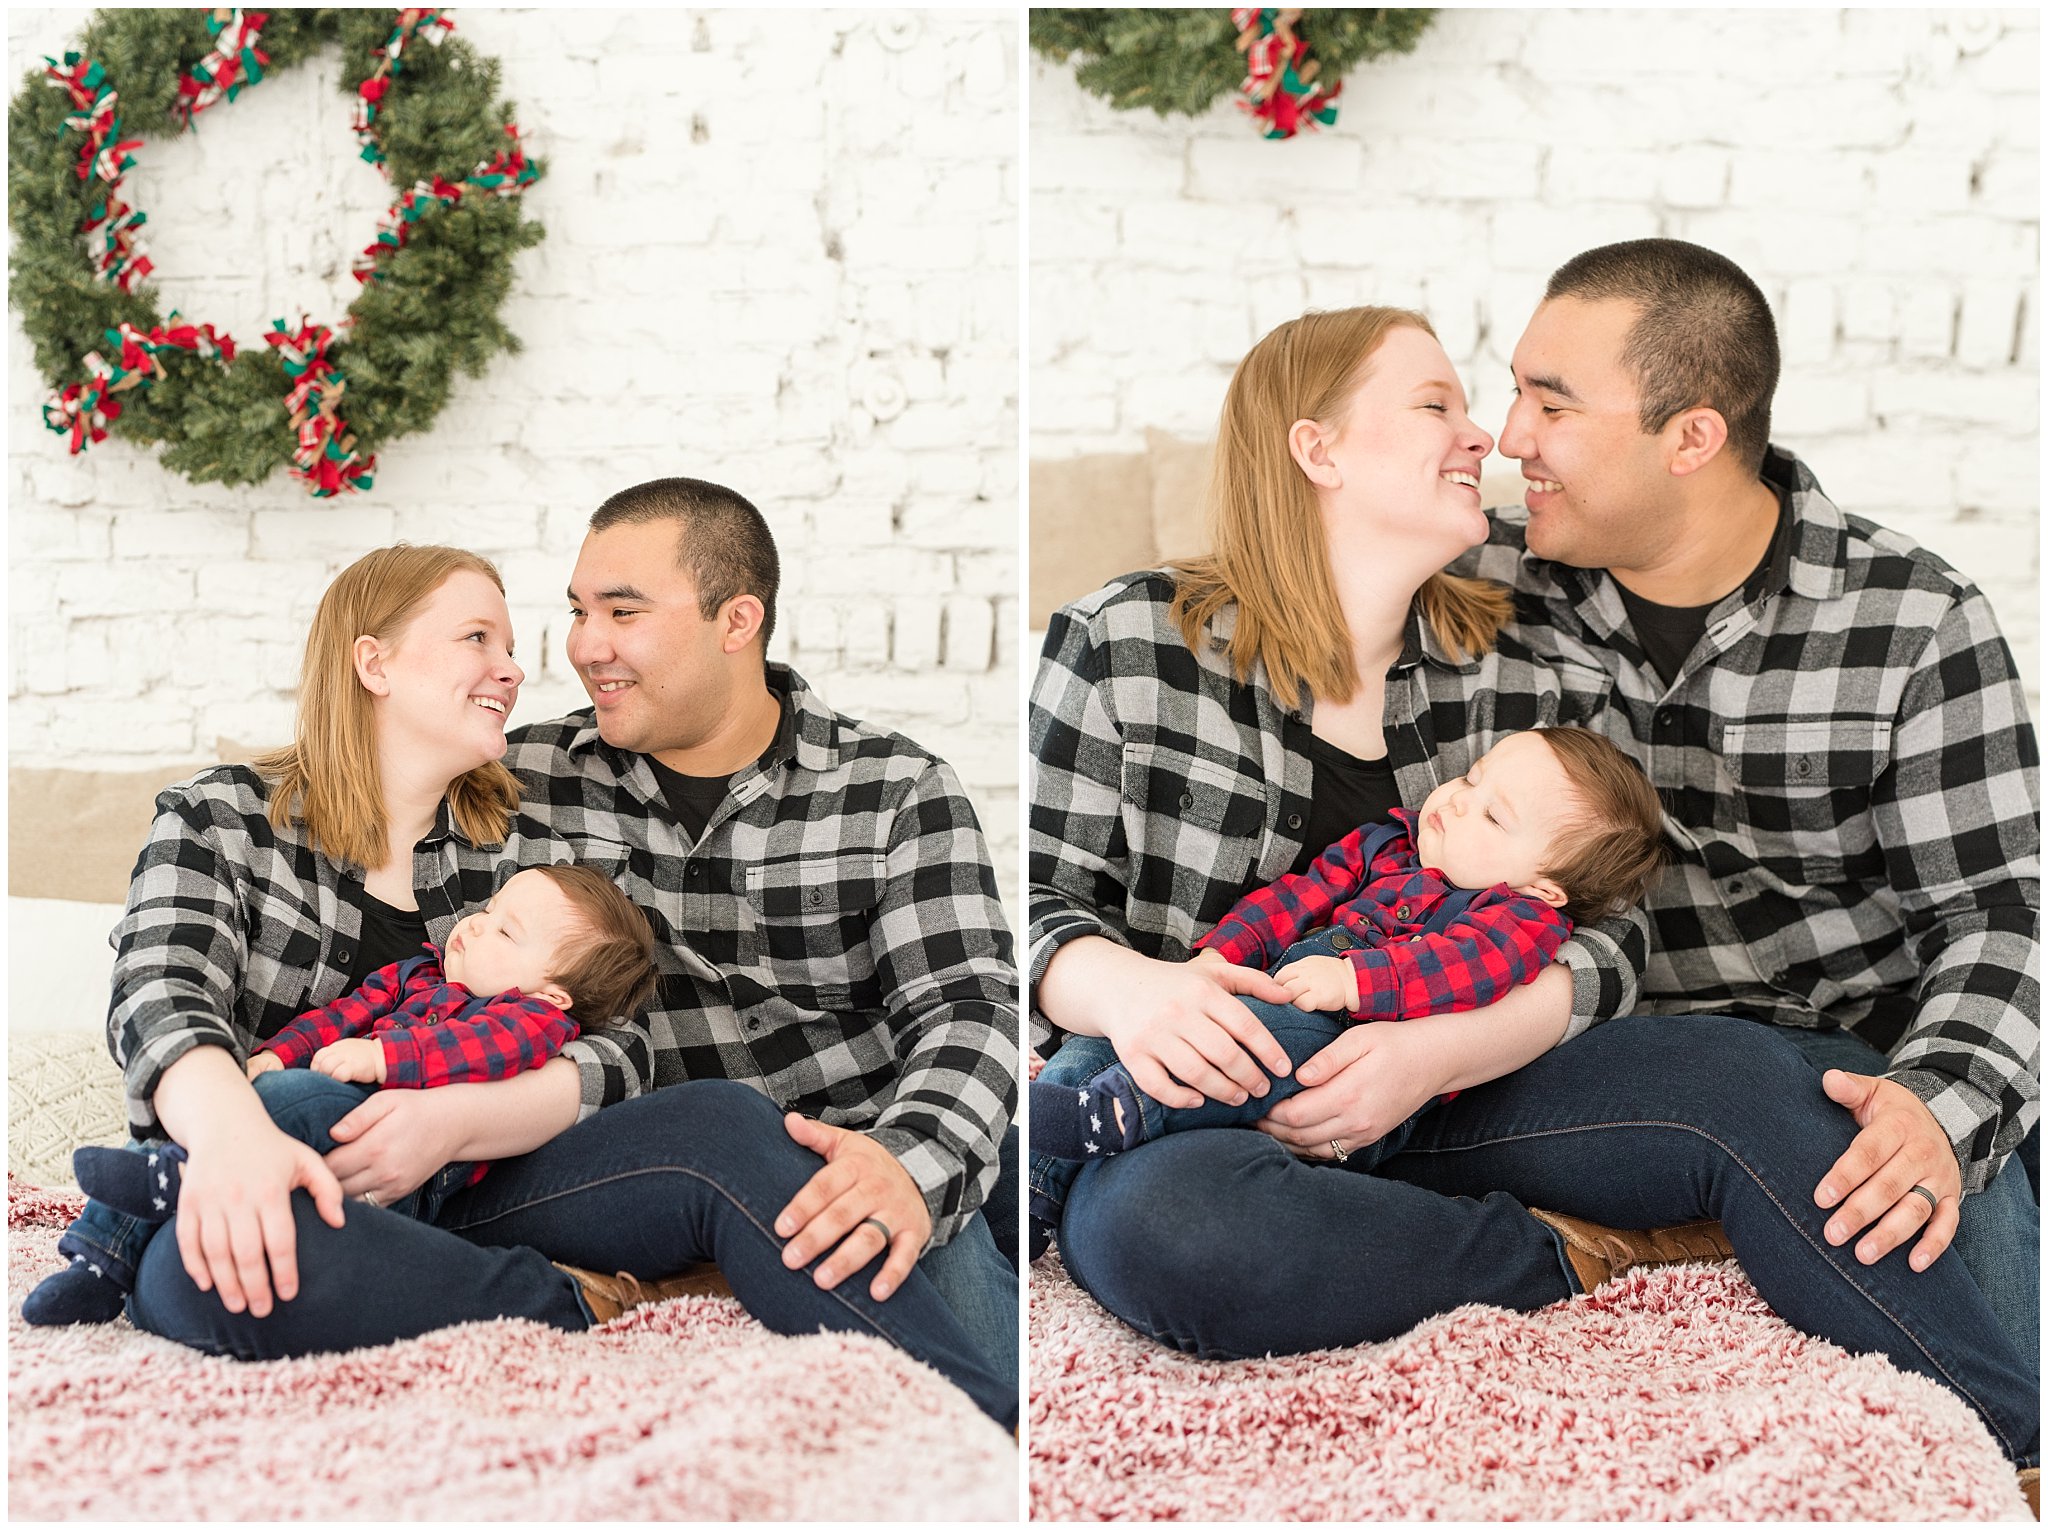 Parents laughing as they go to kiss while holding baby boy on the bed | Family Christmas session at the 5th floor | Utah Photographers | Jessie and Dallin Photography